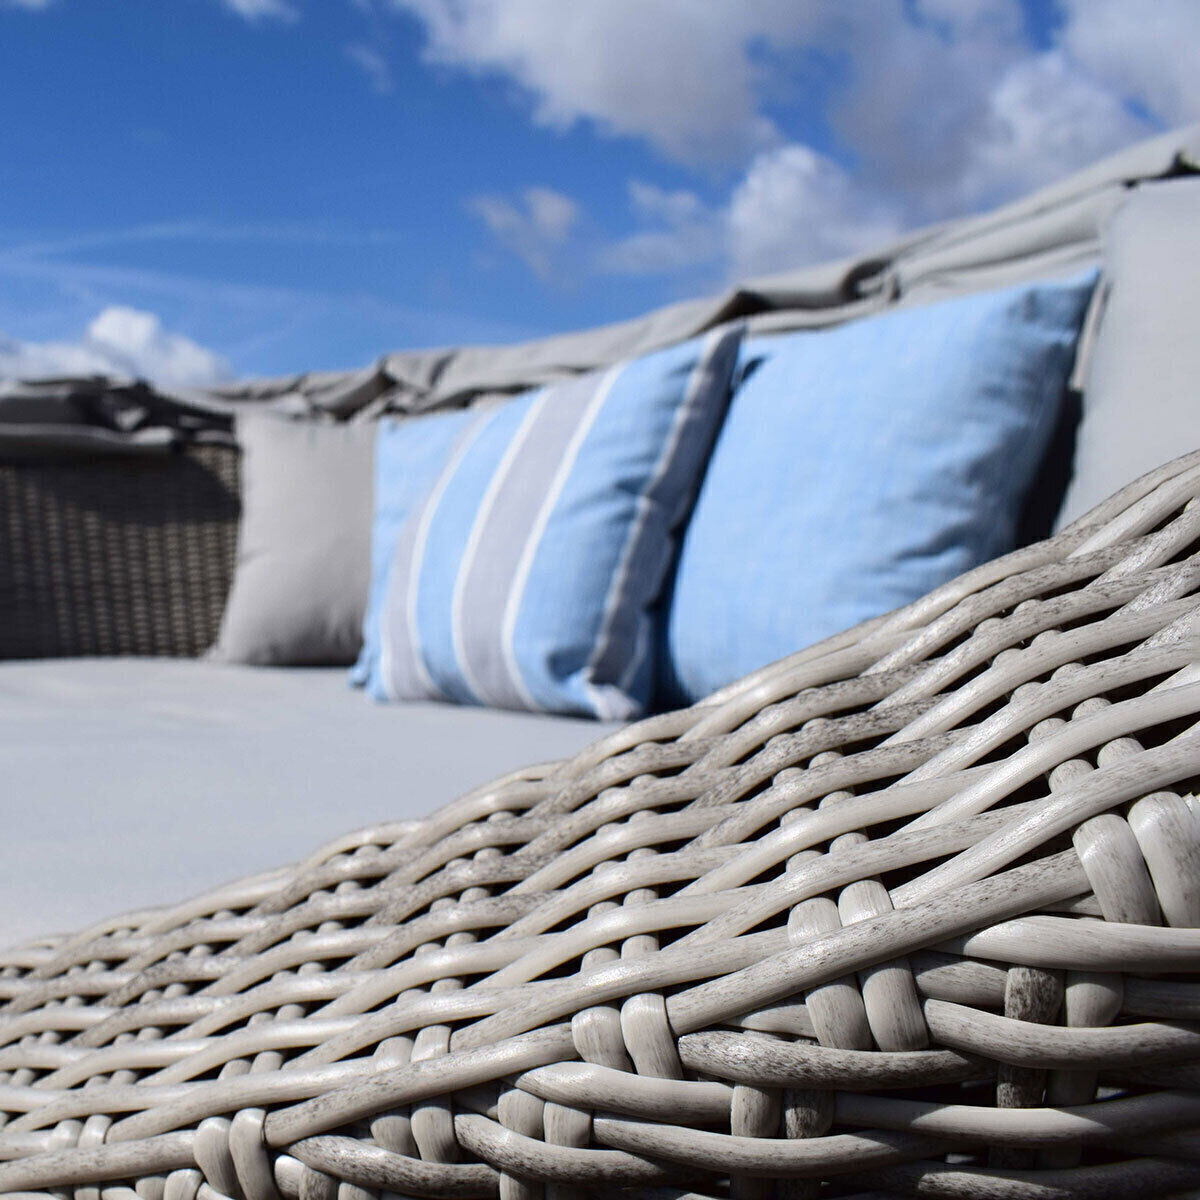 Maze - Oxford Rattan Daybed product image